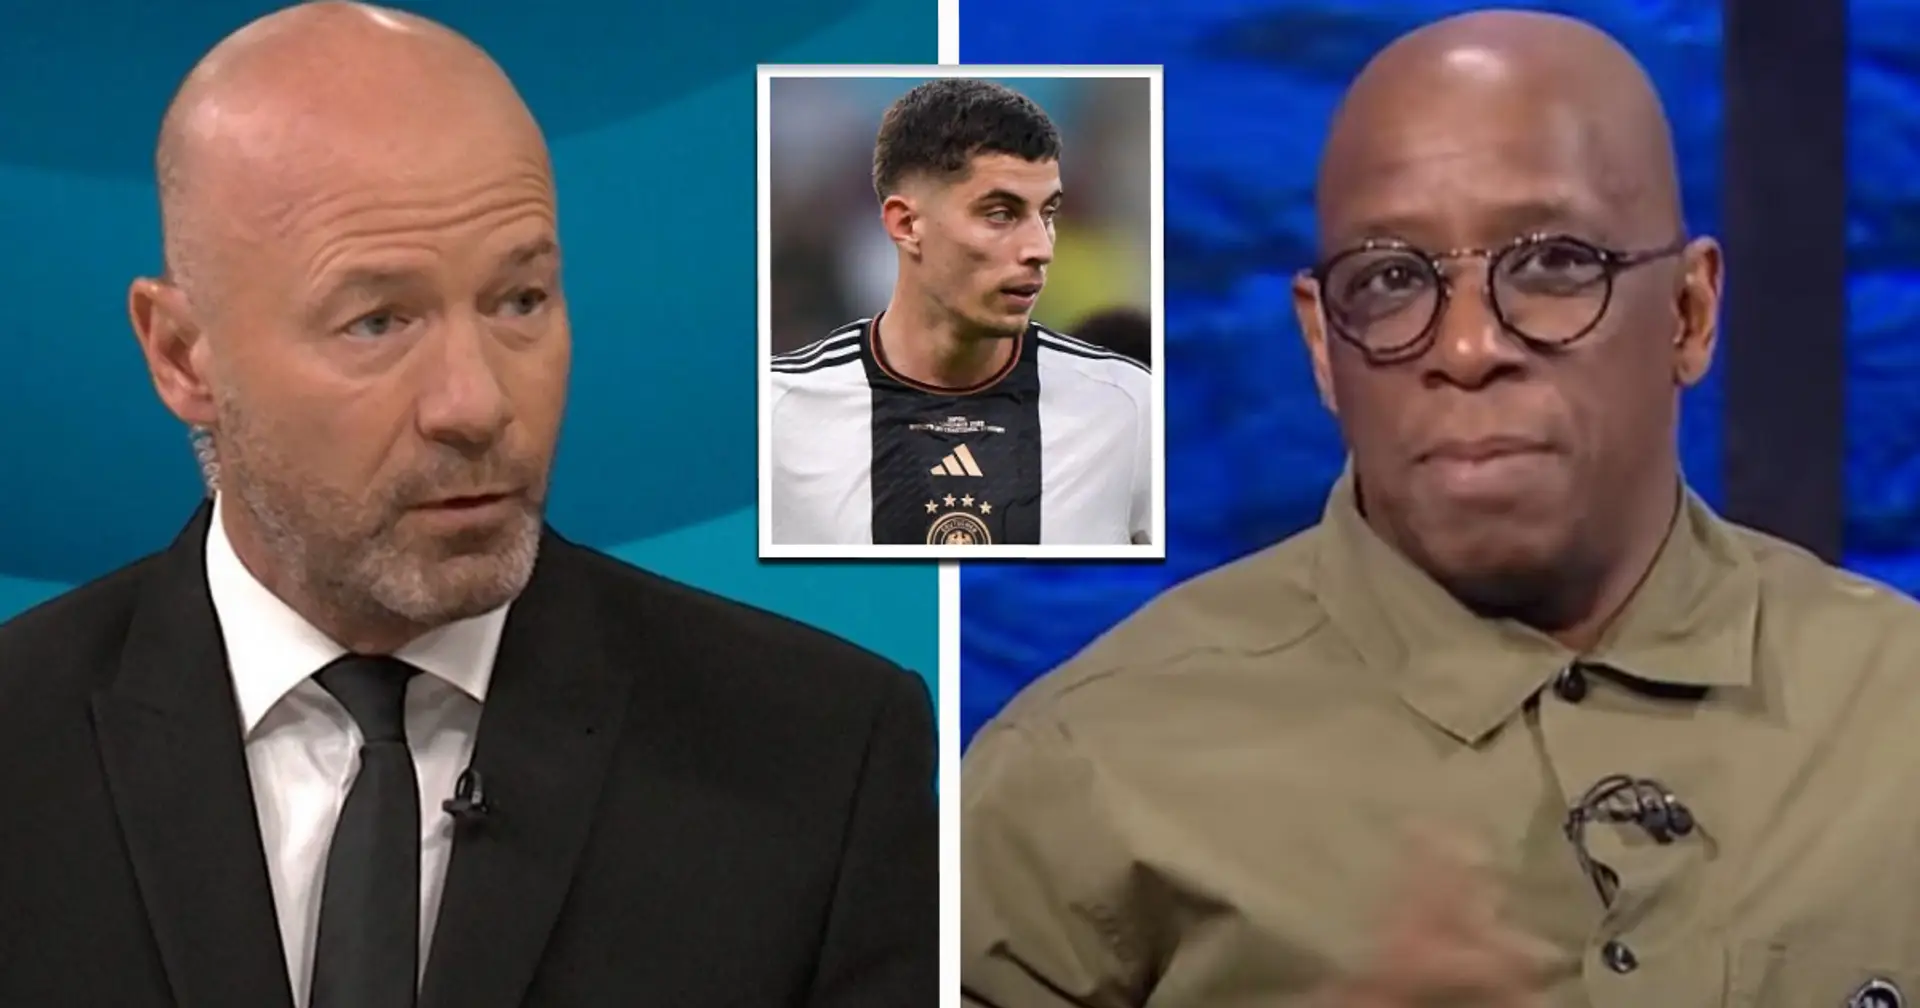 '26 shots and he didn't have one': Havertz slammed by pundits after being dropped by Germany